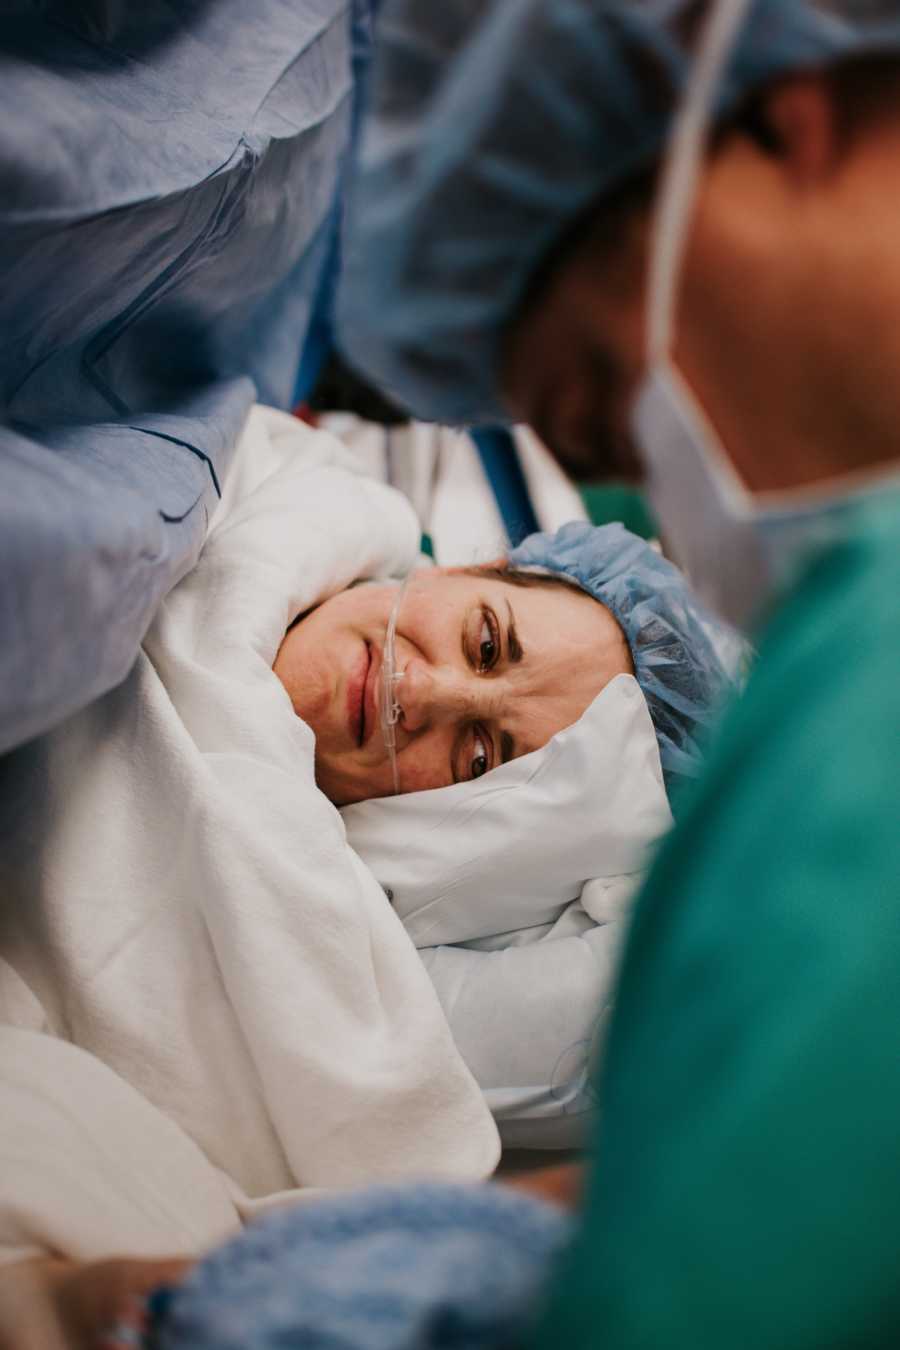 Pregnant woman who had c section looks over at newborn in heart failure crying